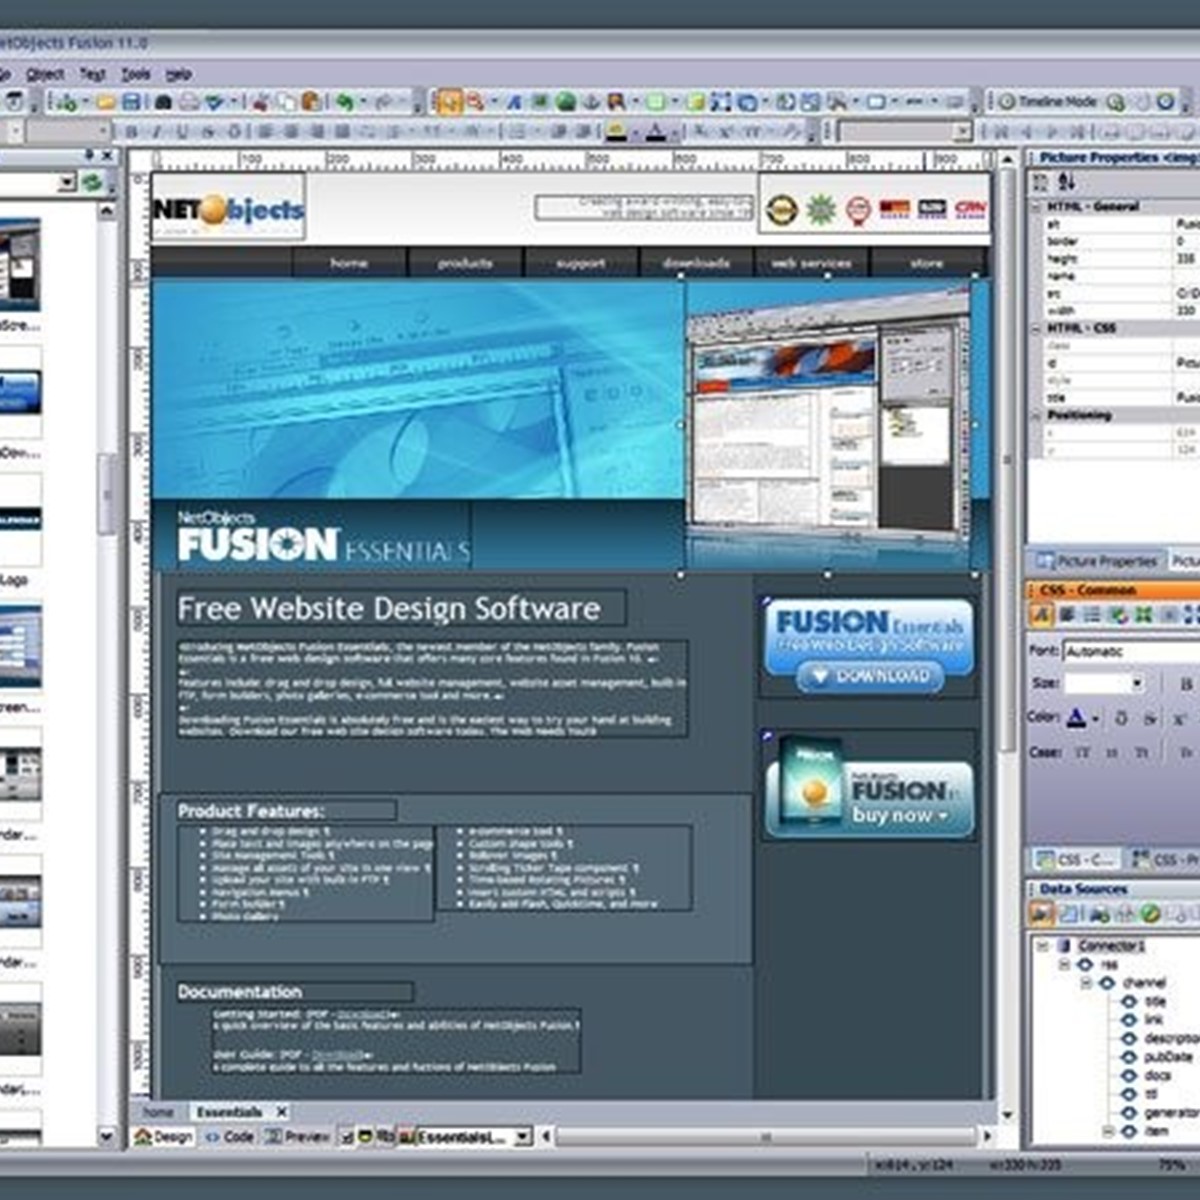 Netobjects fusion 10 free download